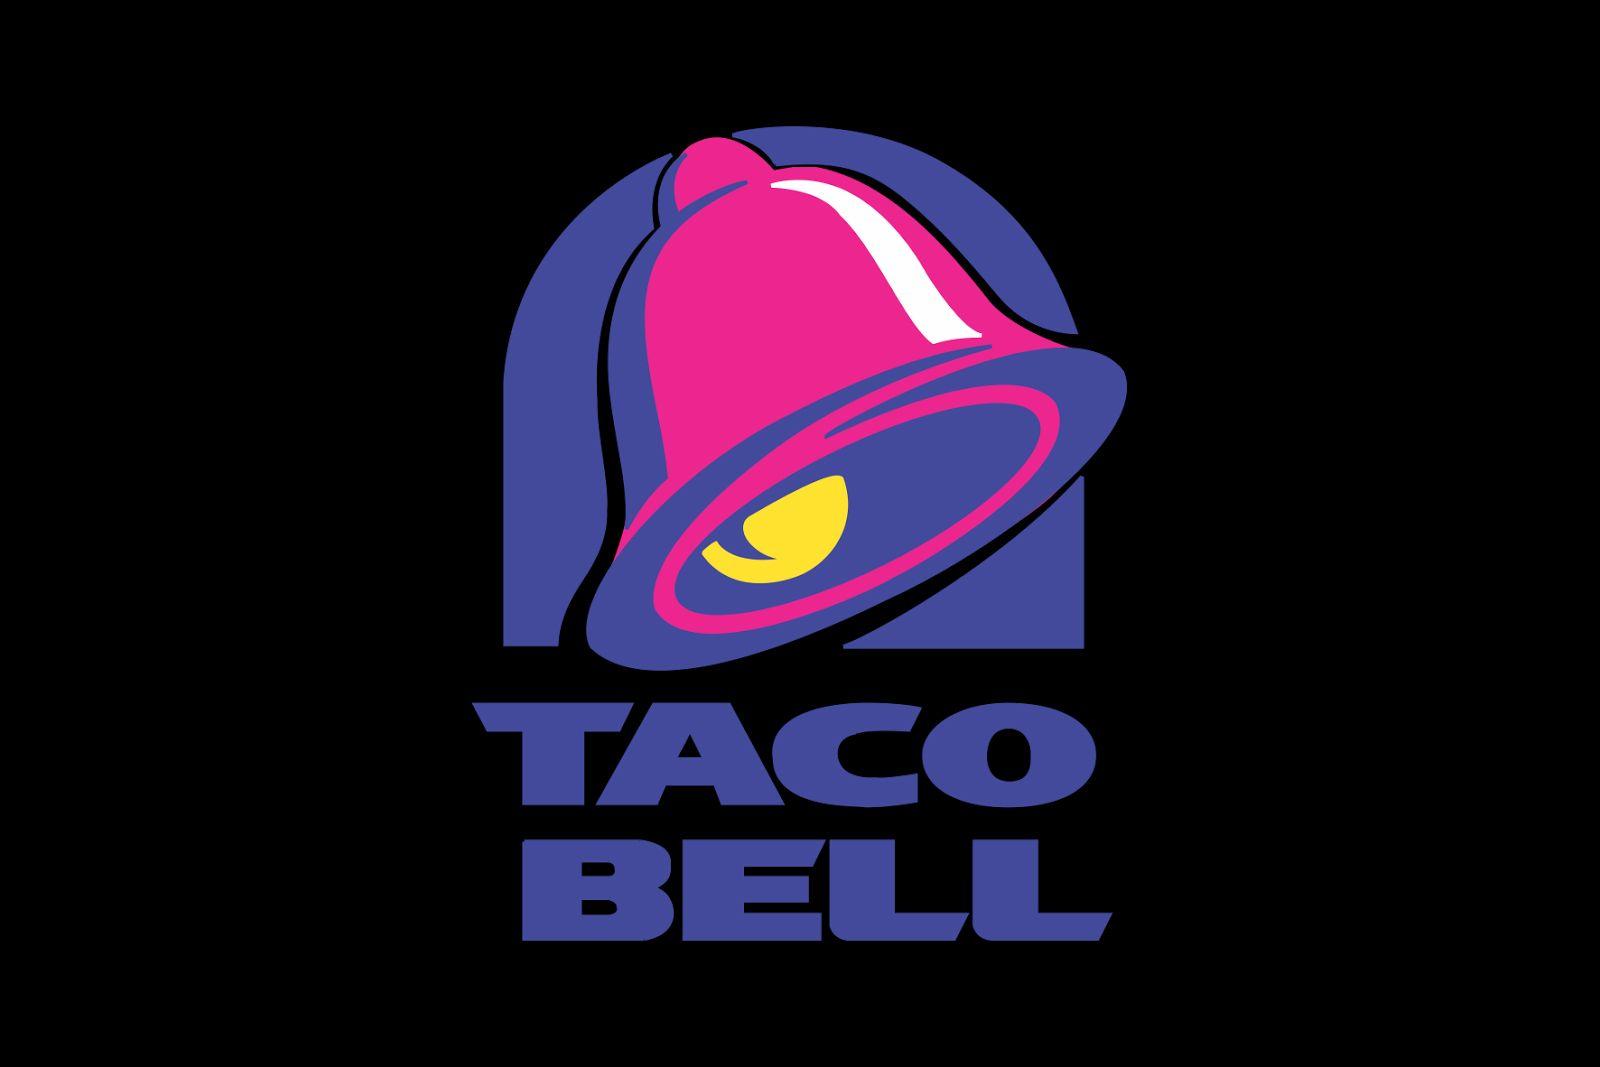 Black Bell Logo - Taco Bell Logo, Taco Bell Symbol, Meaning, History and Evolution